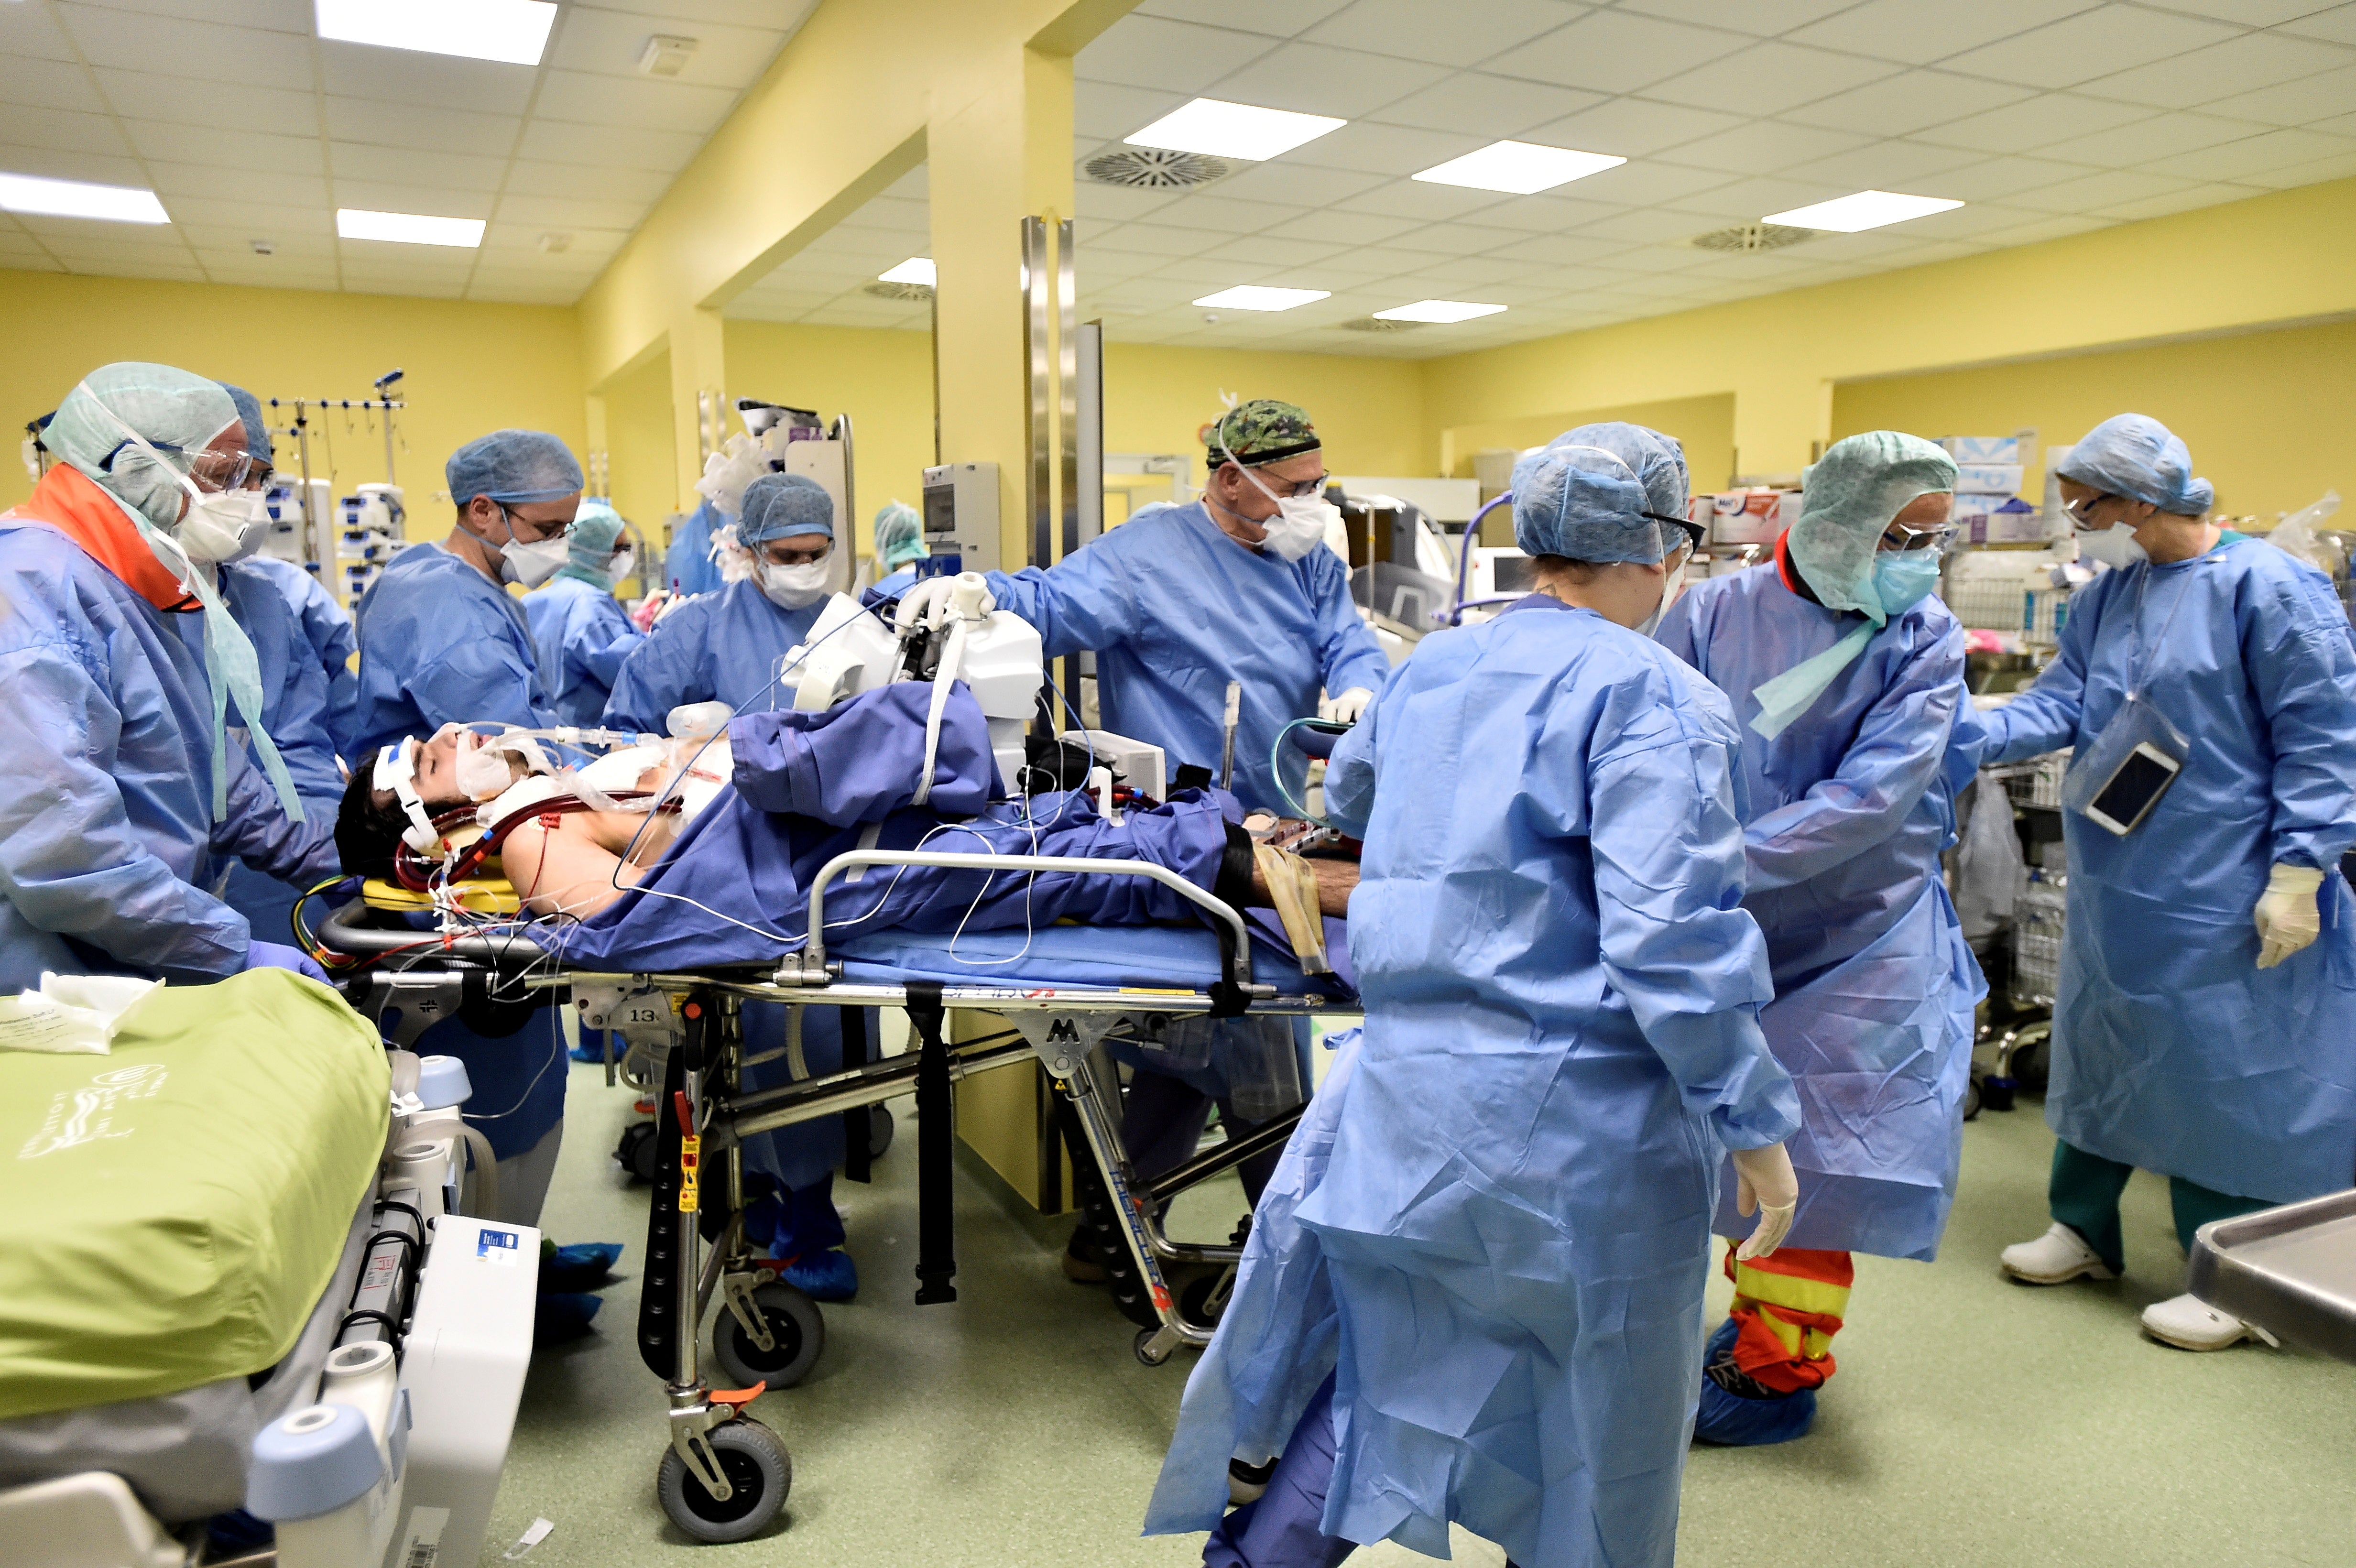 Medical staff move an 18-year-old Covid-19 patient in an intensive care unit at the San Raffaele hospital in Milan, Italy, in March